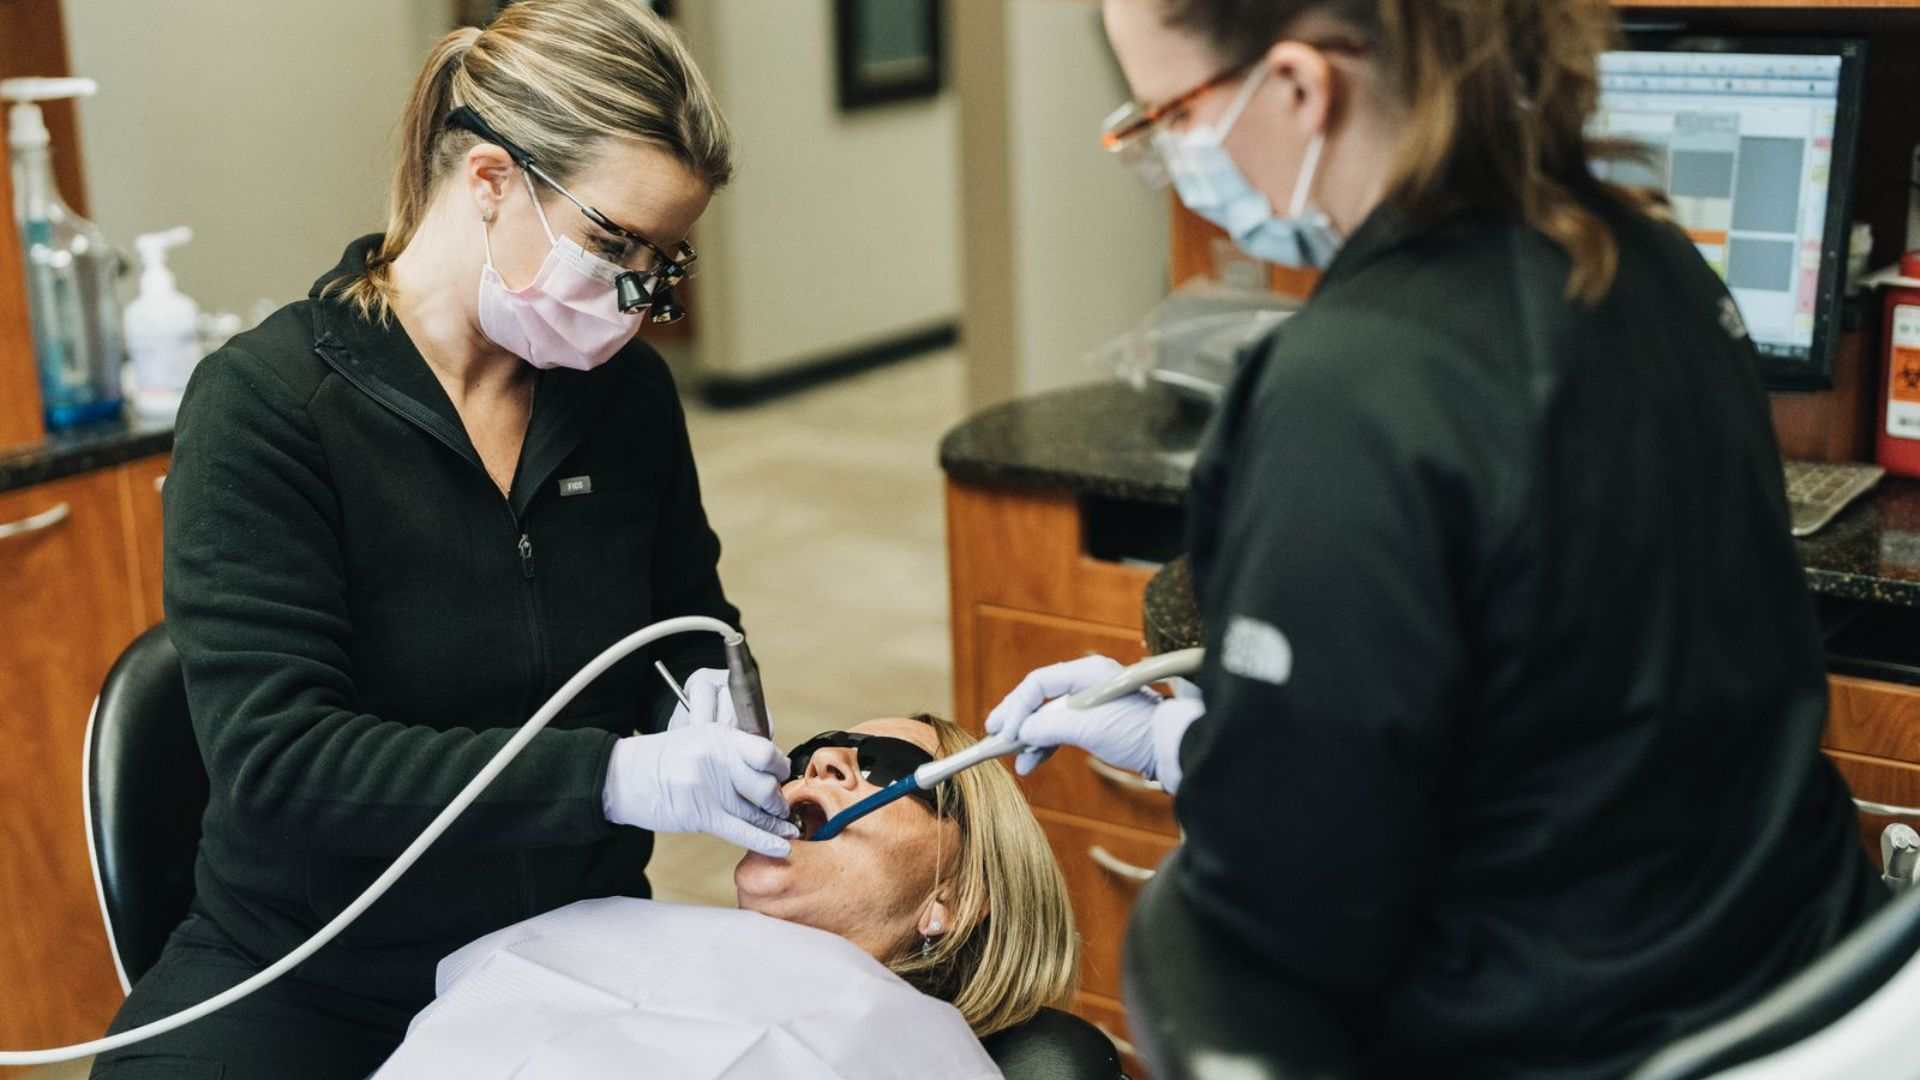 Dental Inspection and Treatment in Hector, MN